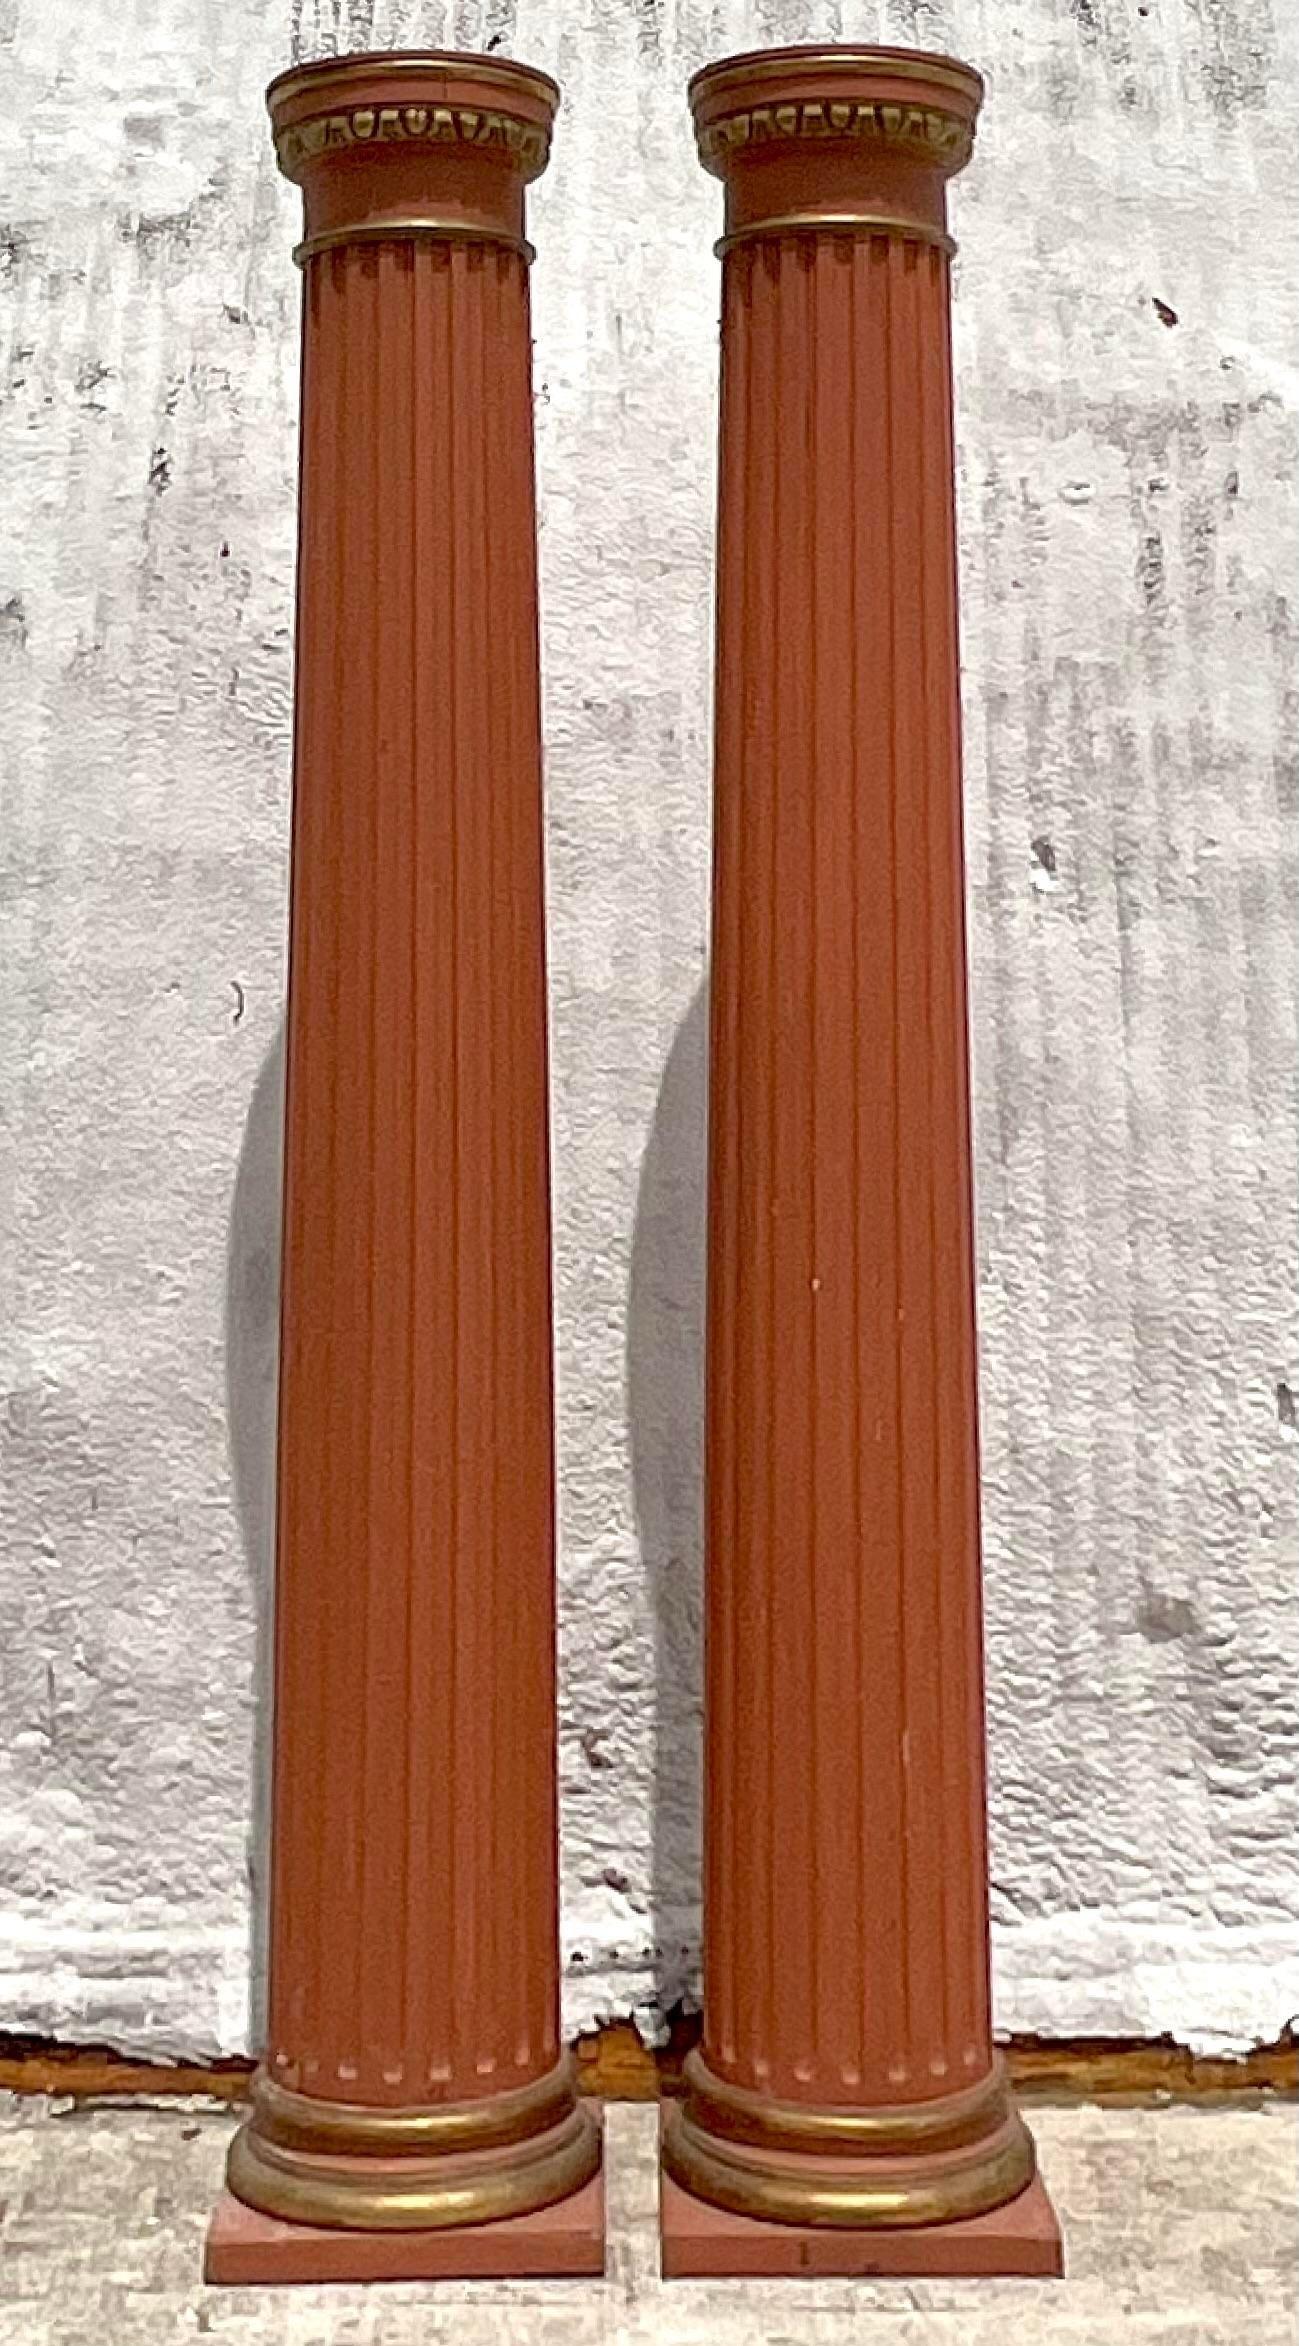 A fabulous pair of vintage Boho wood columns. Made in the 18th century and have all the glorious patina from time. Separate into three pieces for easy movement. Acquired from a Palm Beach estate.